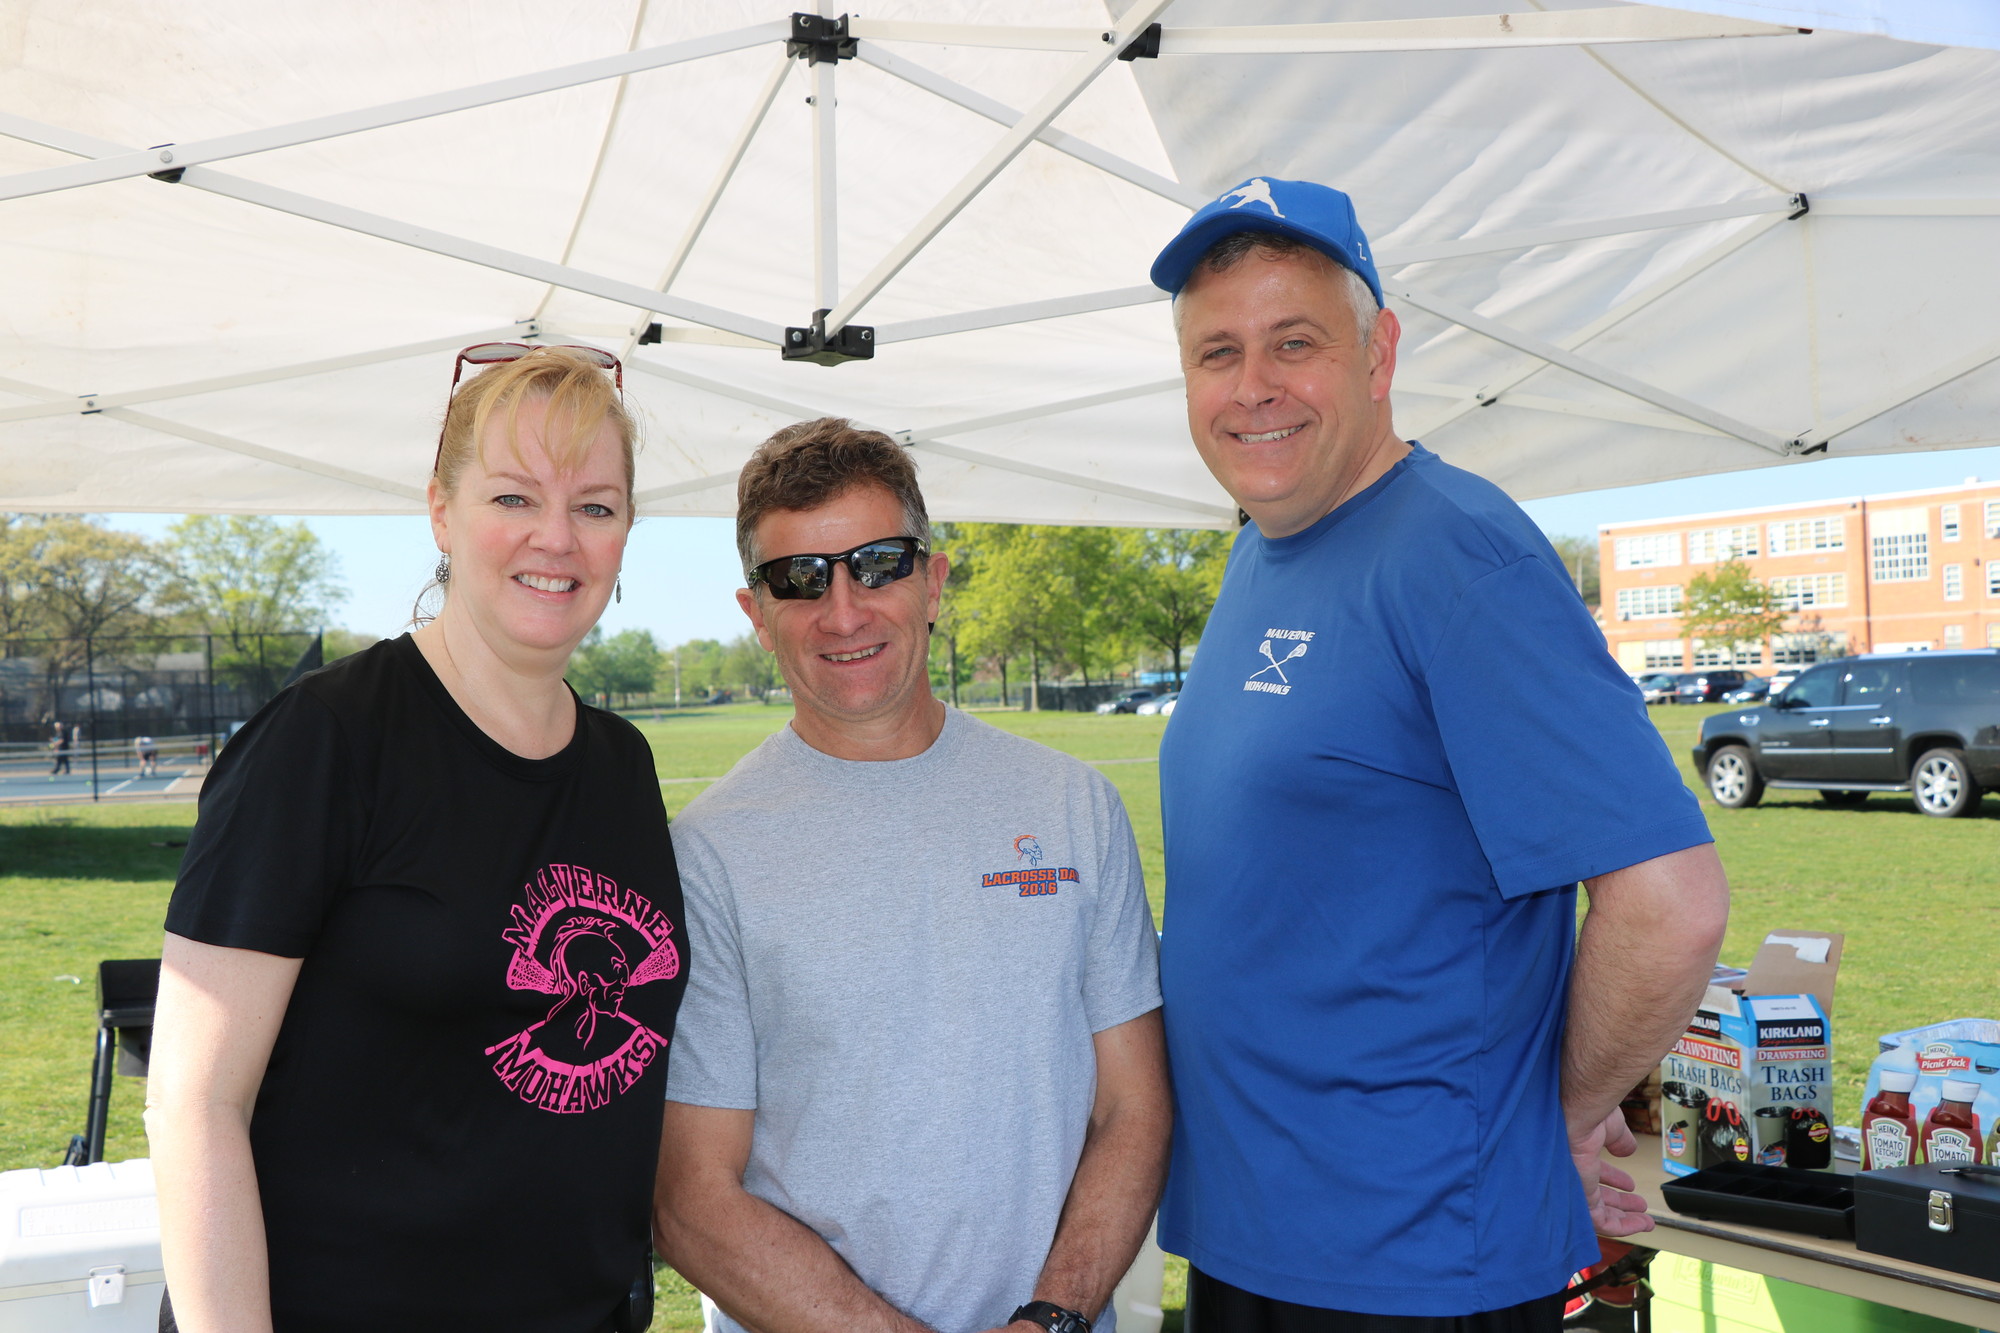 Bernadette Russell preps for Malverne Lacrosse Day last week. She was helped by Michael Ruddick and Frank Landers, both of whom have coached for the Malverne program.